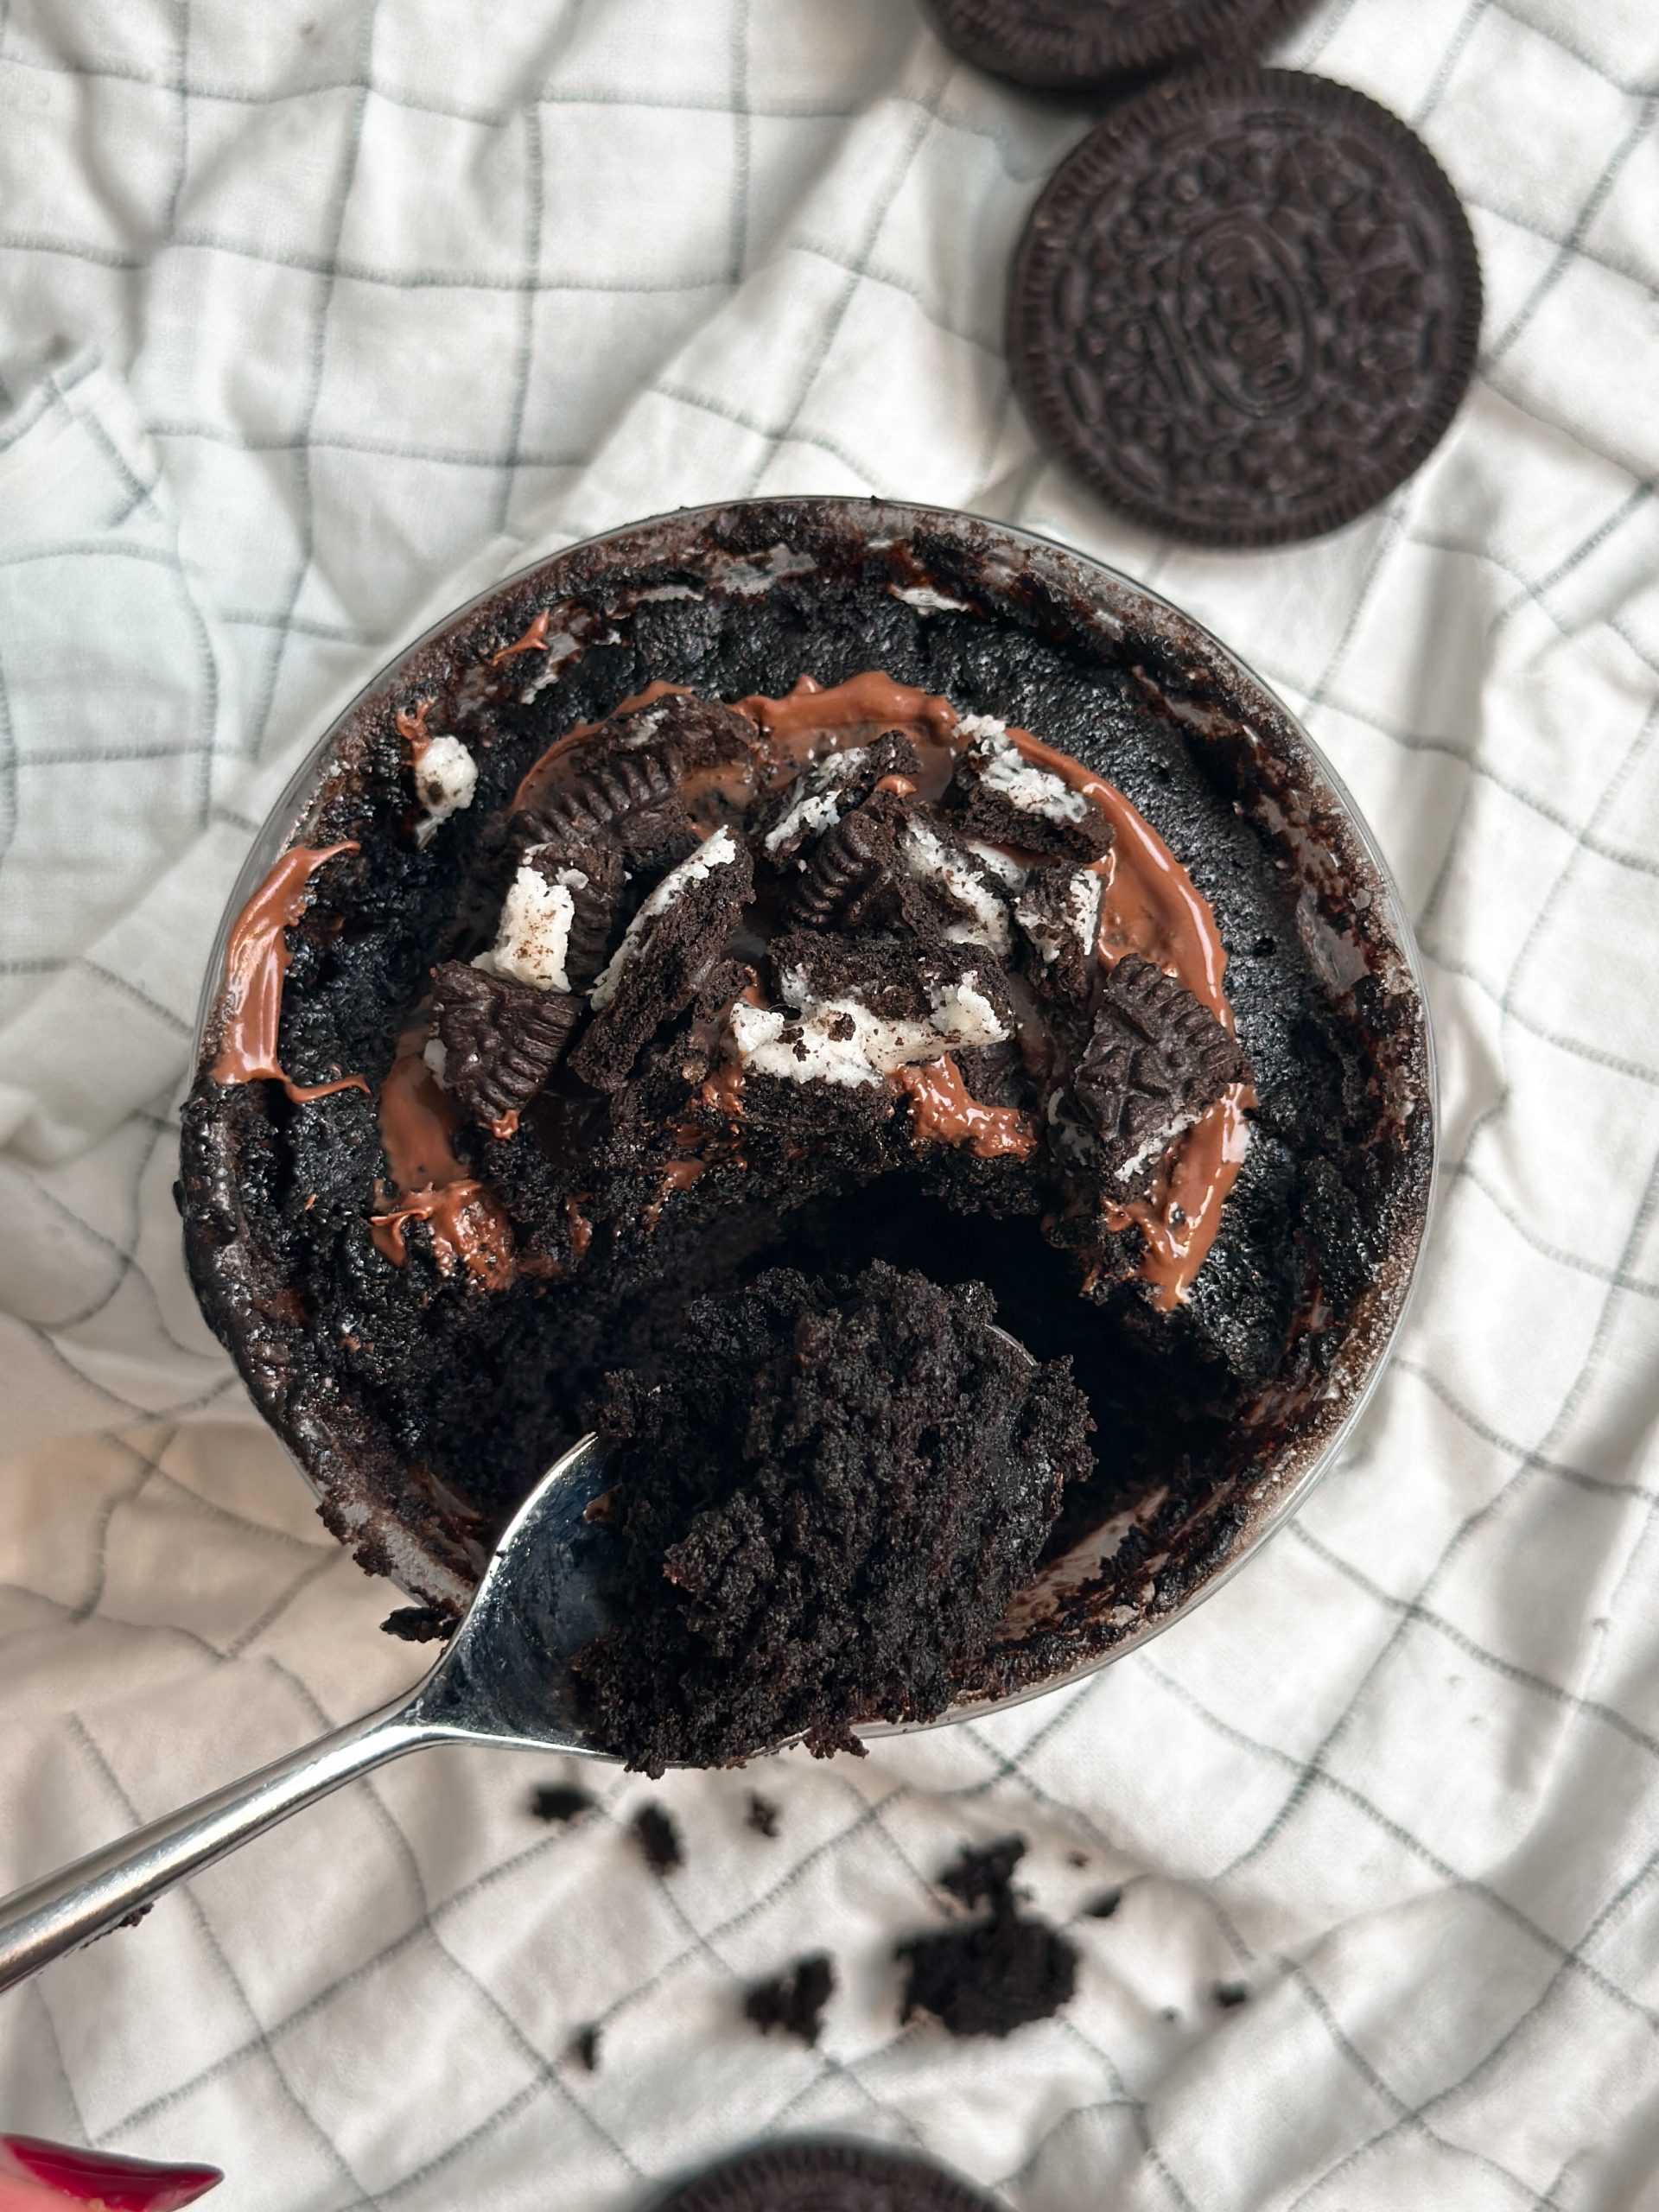 spoon taking bite out of oreo chocolate mug cake revealing moist chocolatey interior, pic from the top